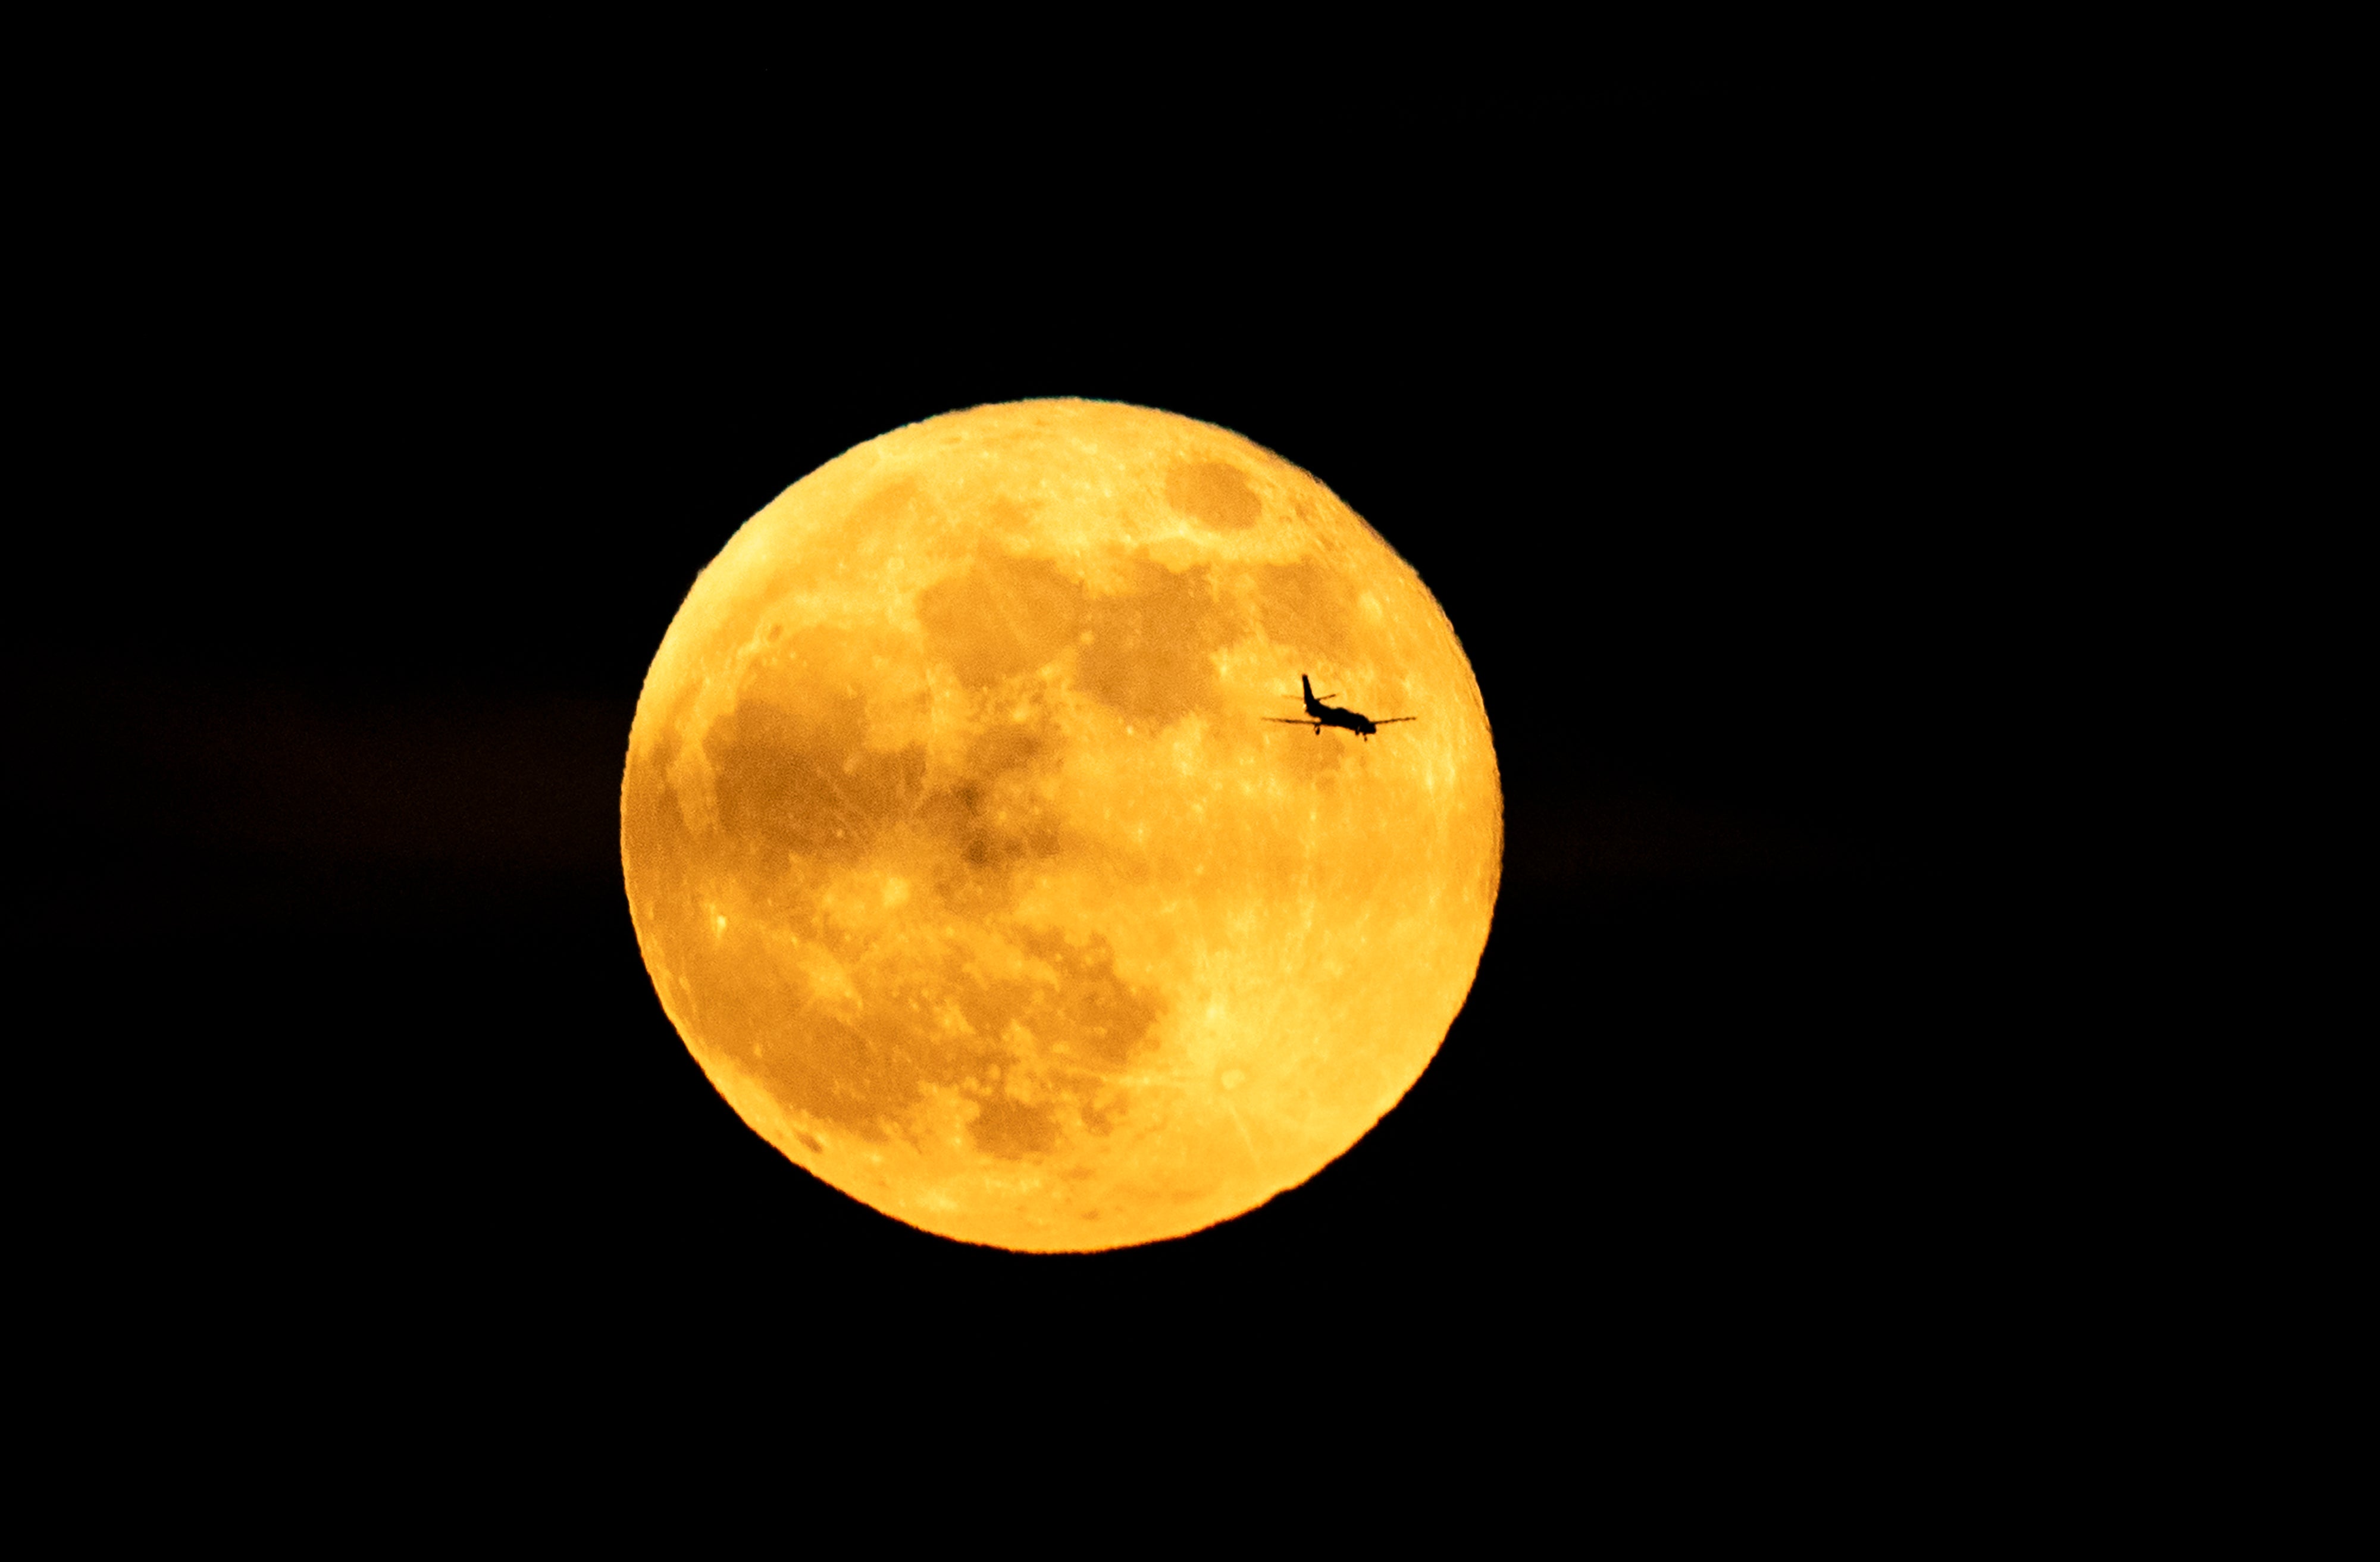 The silhouette of a plane is seen in front of the full moon on May 26, 2021 in Rome